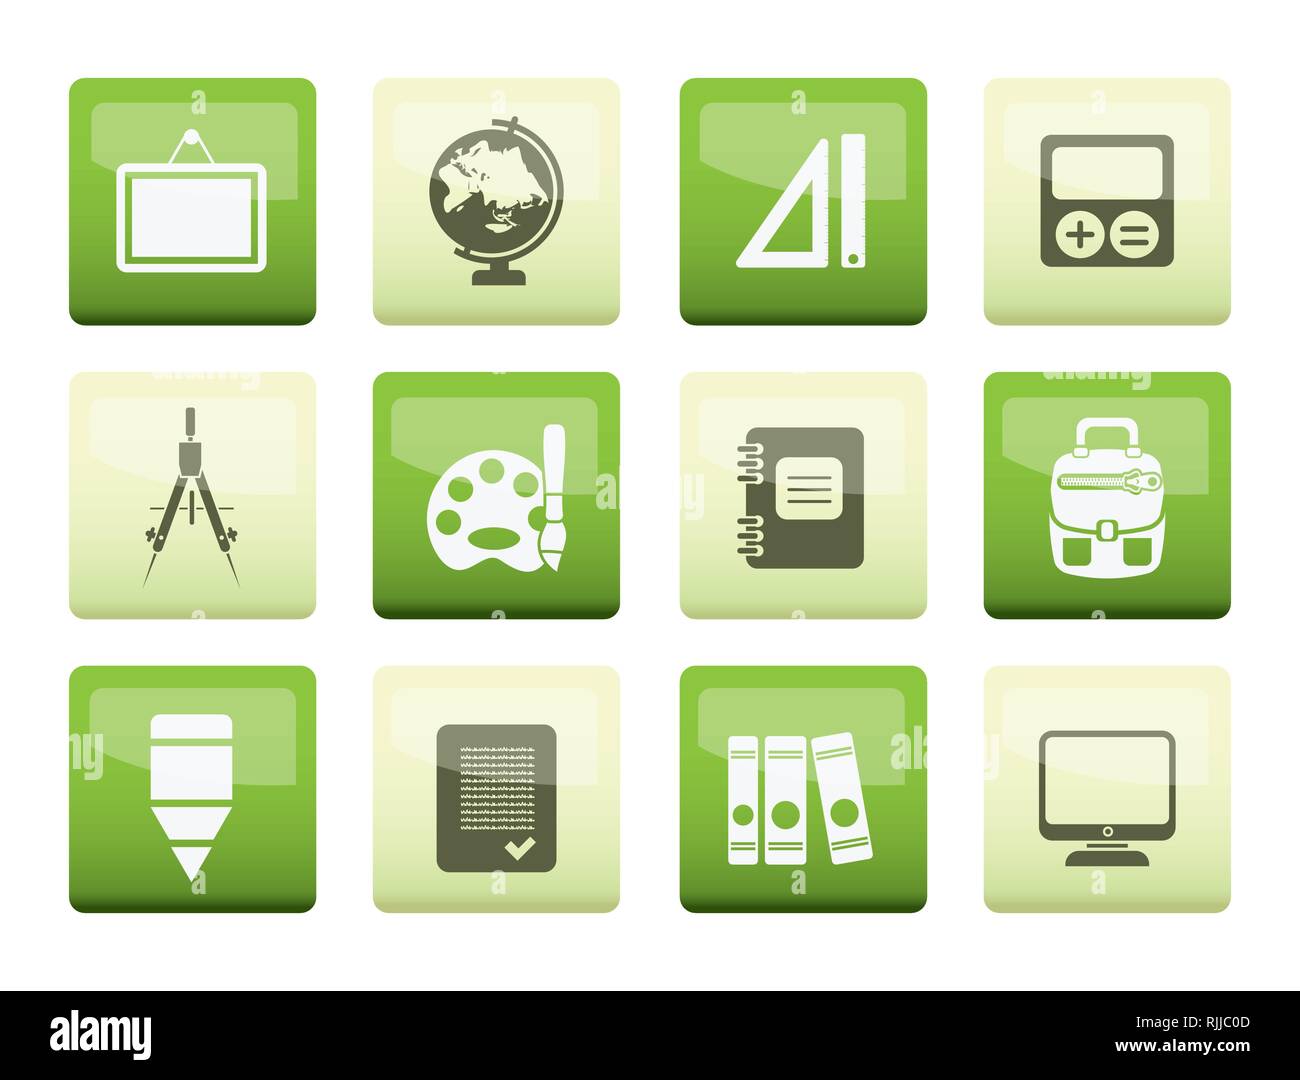 School and education icons over green background - vector icon set Stock Vector